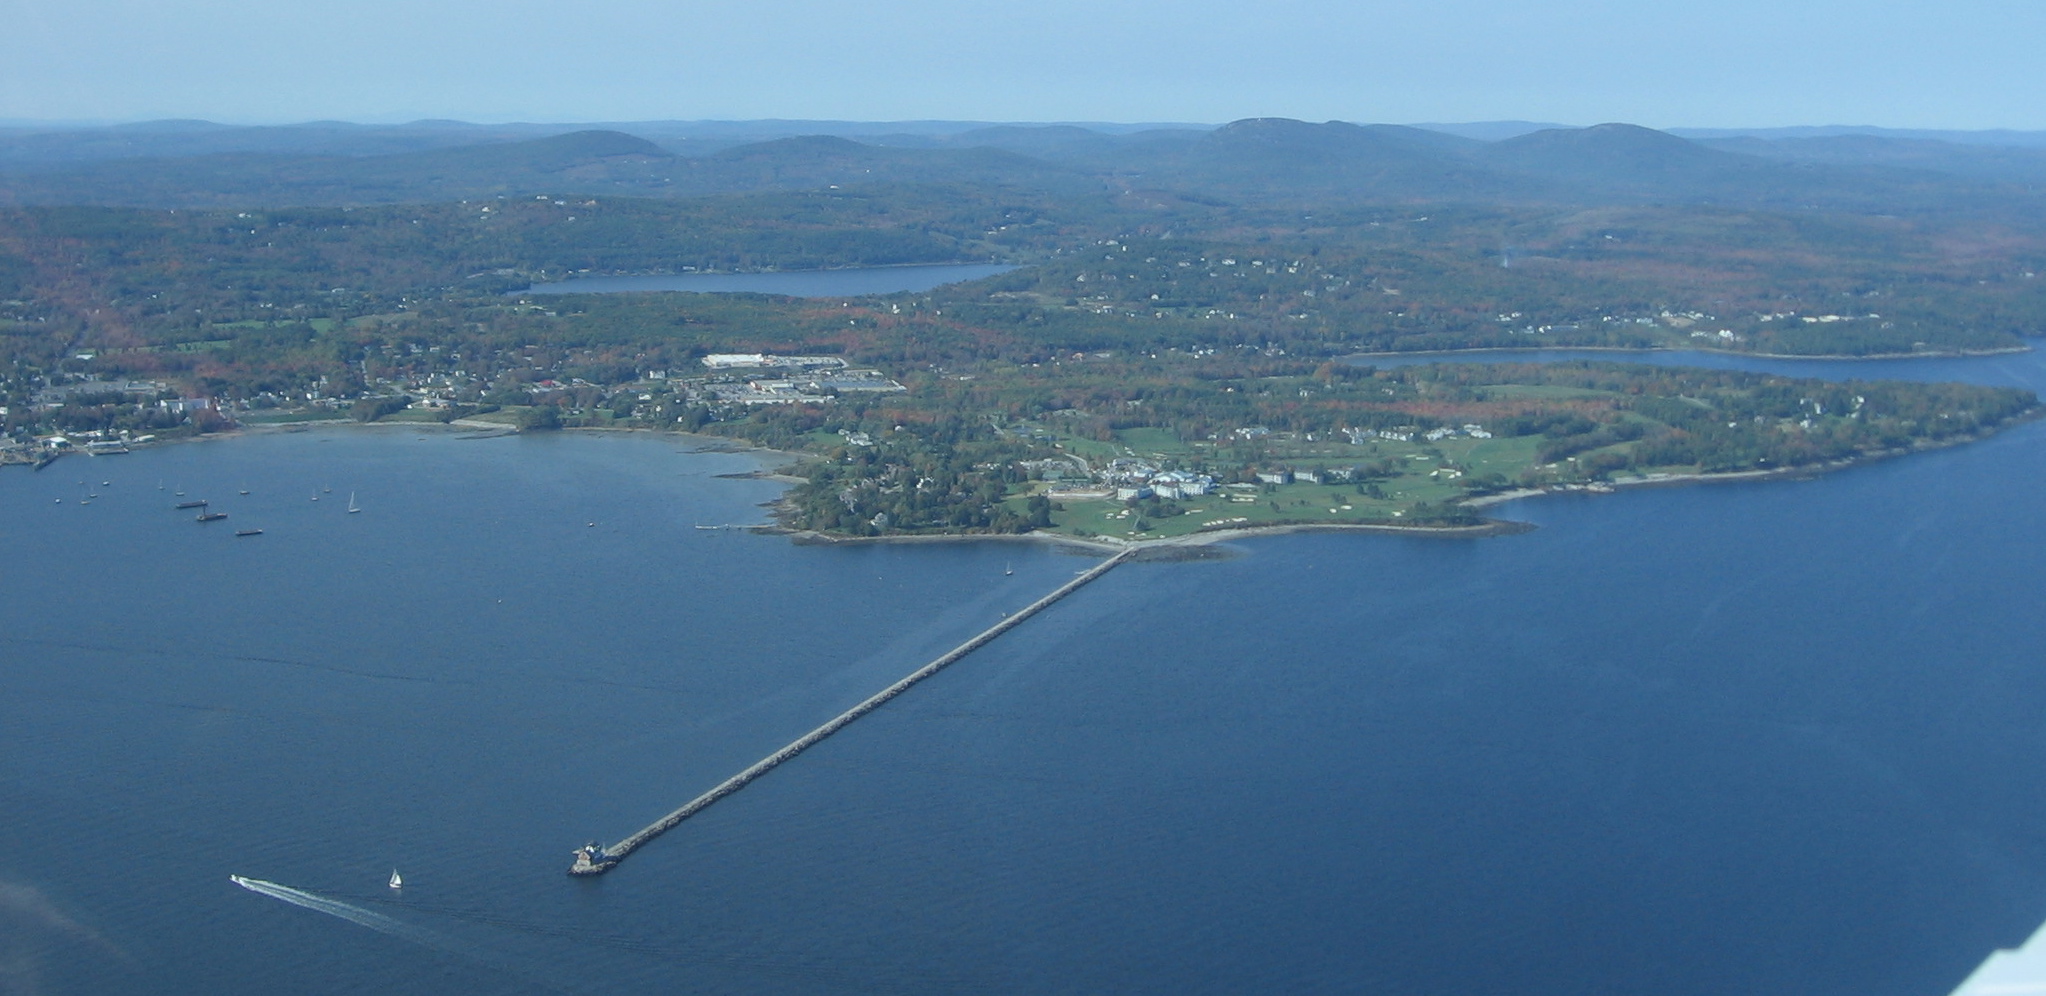 Rockland Harbors Breakwater Jetty and Lighthouse